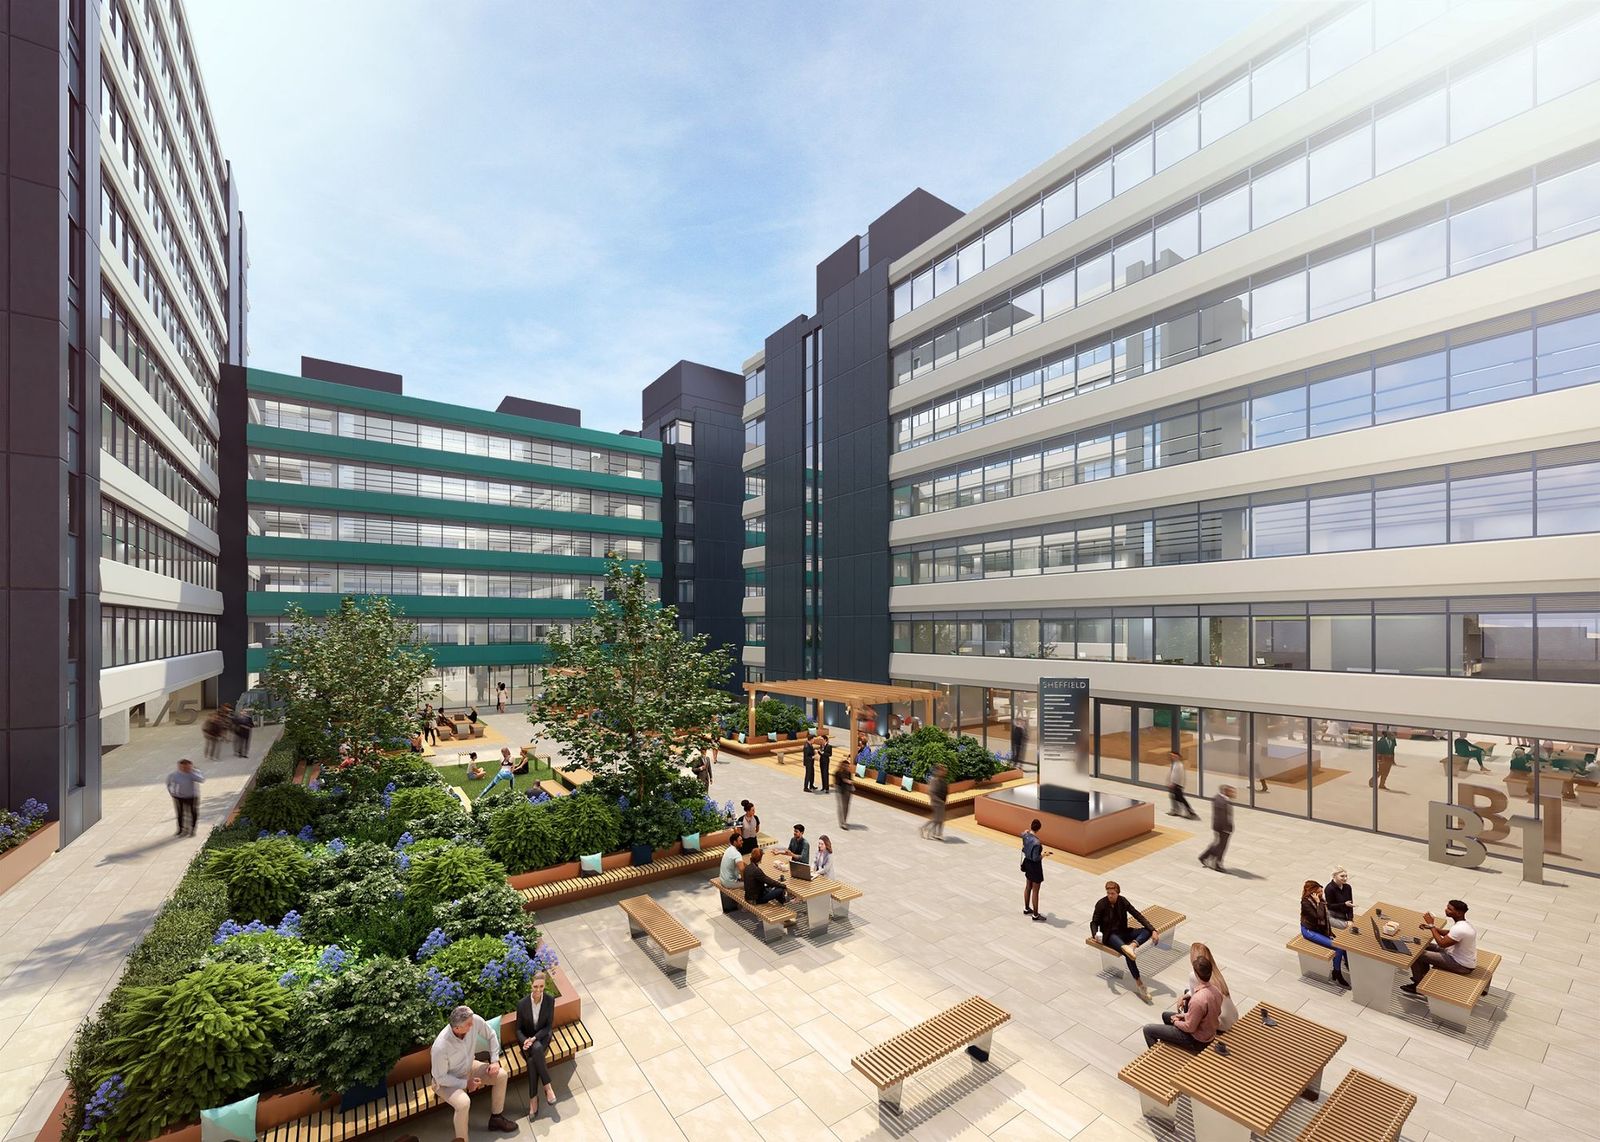 Work is underway creating a vast outdoor plaza at the heart of Sheffield’s Pennine Five